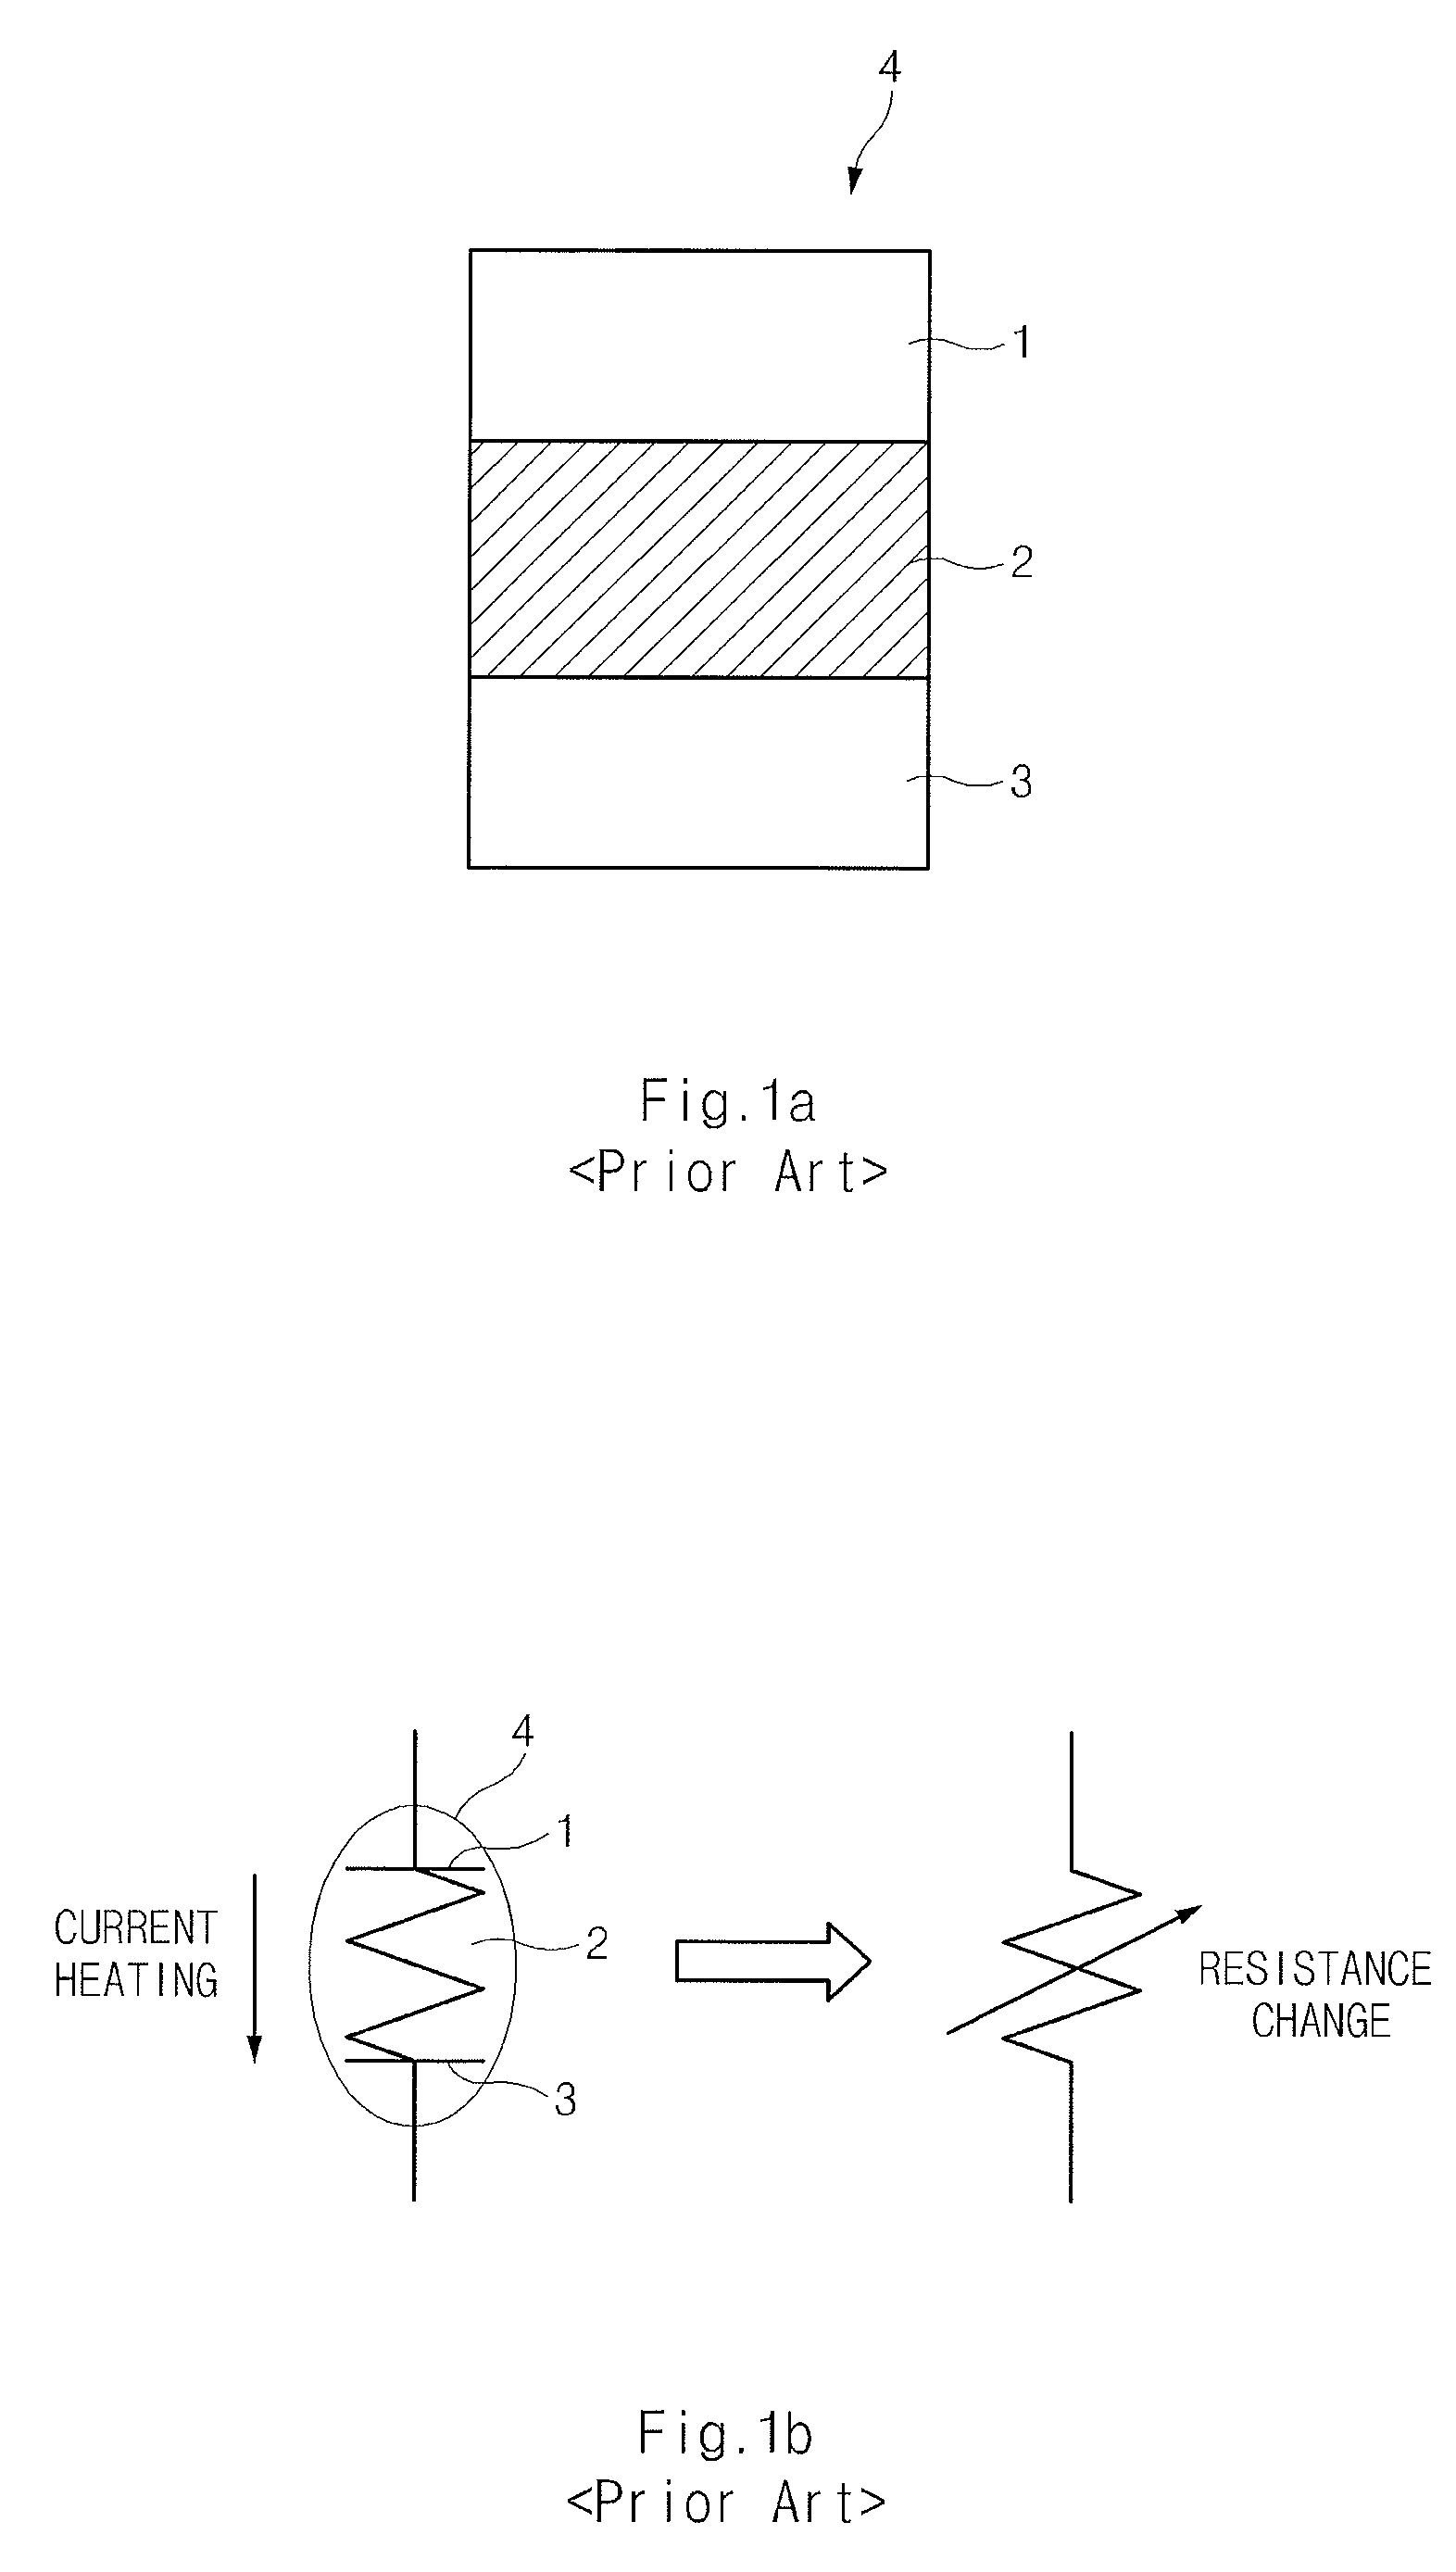 Phase change memory device with reference cell array